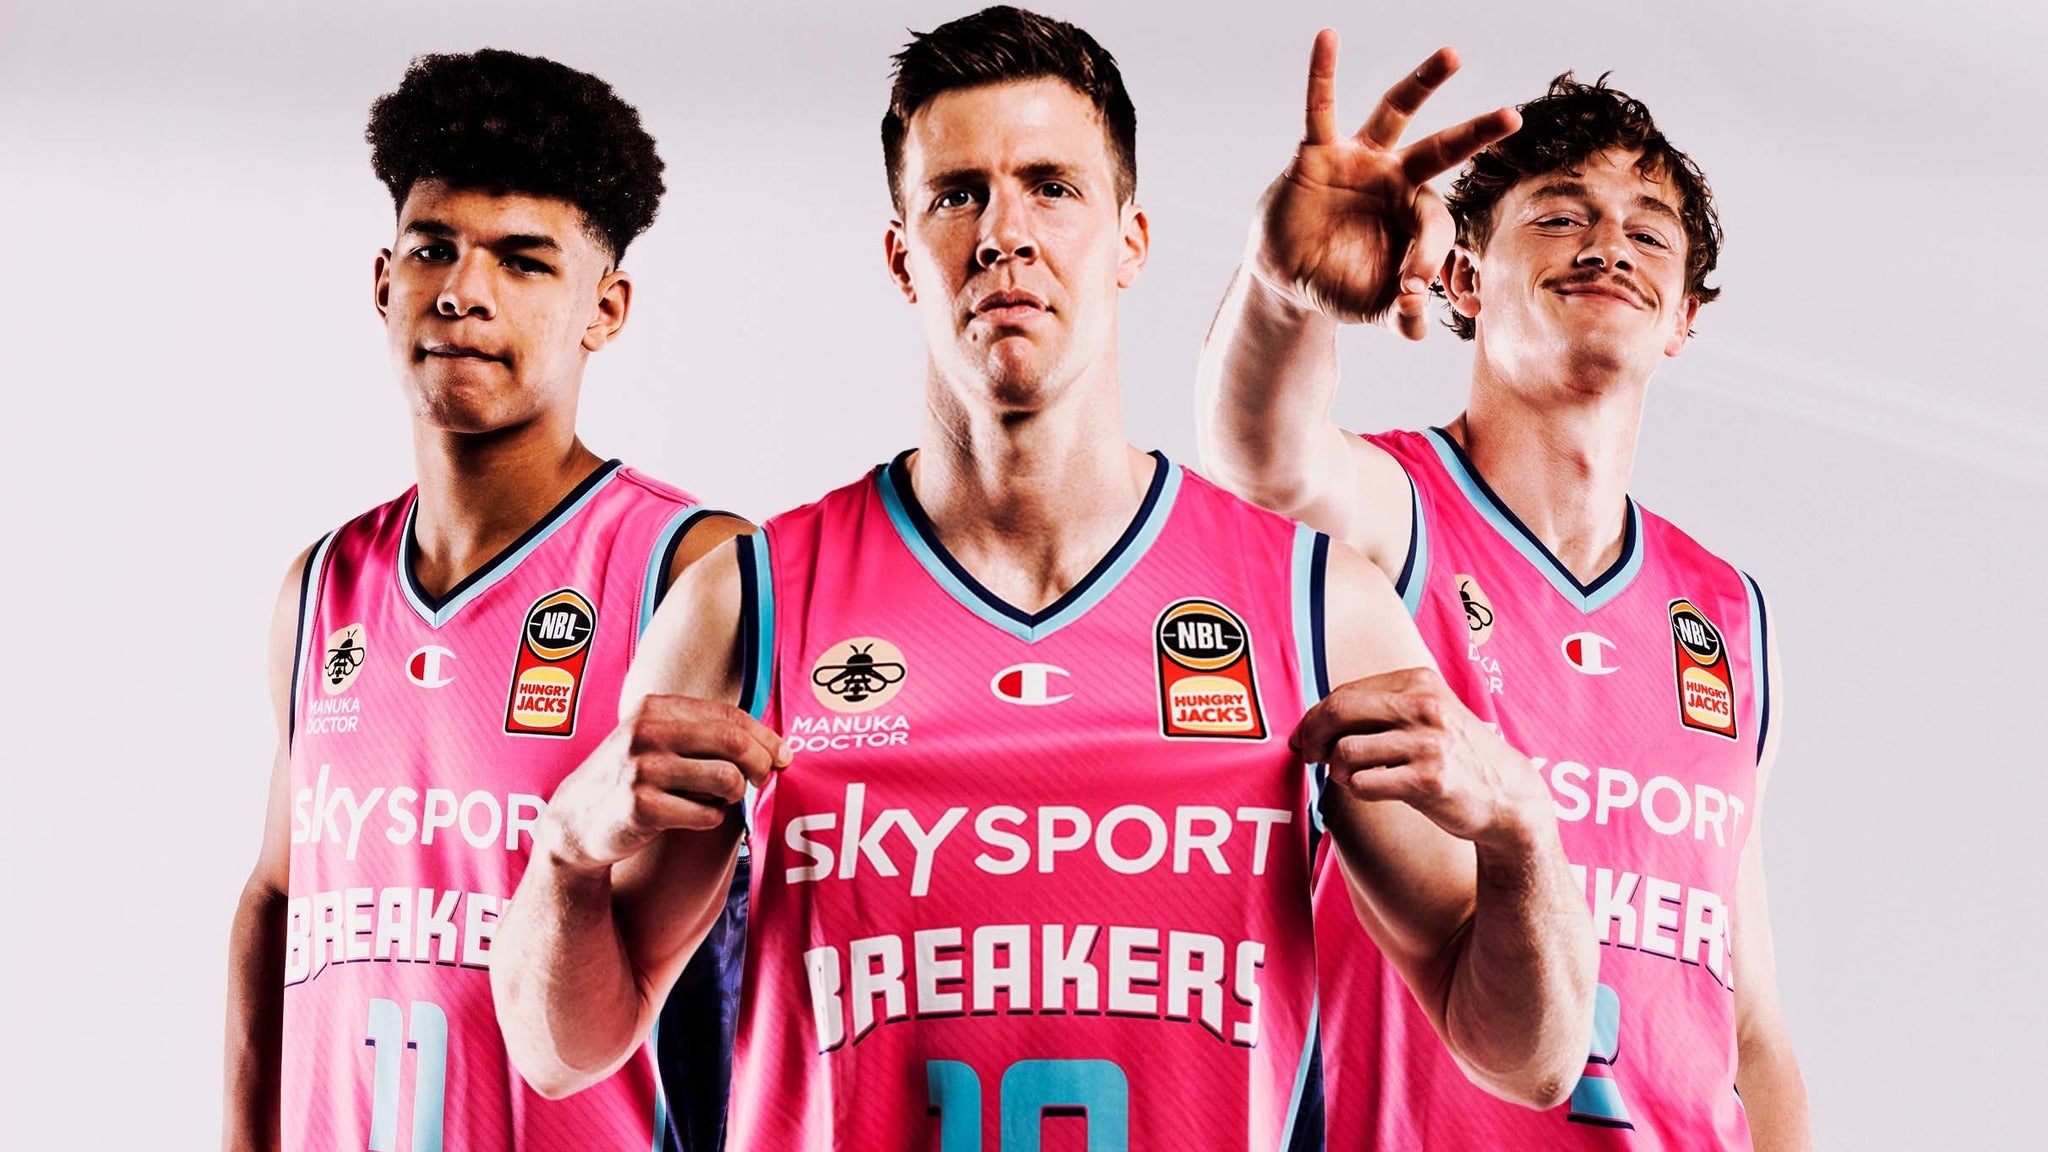 Image used with permission from Ticketmaster | SKY Sport Breakers v Melbourne United tickets